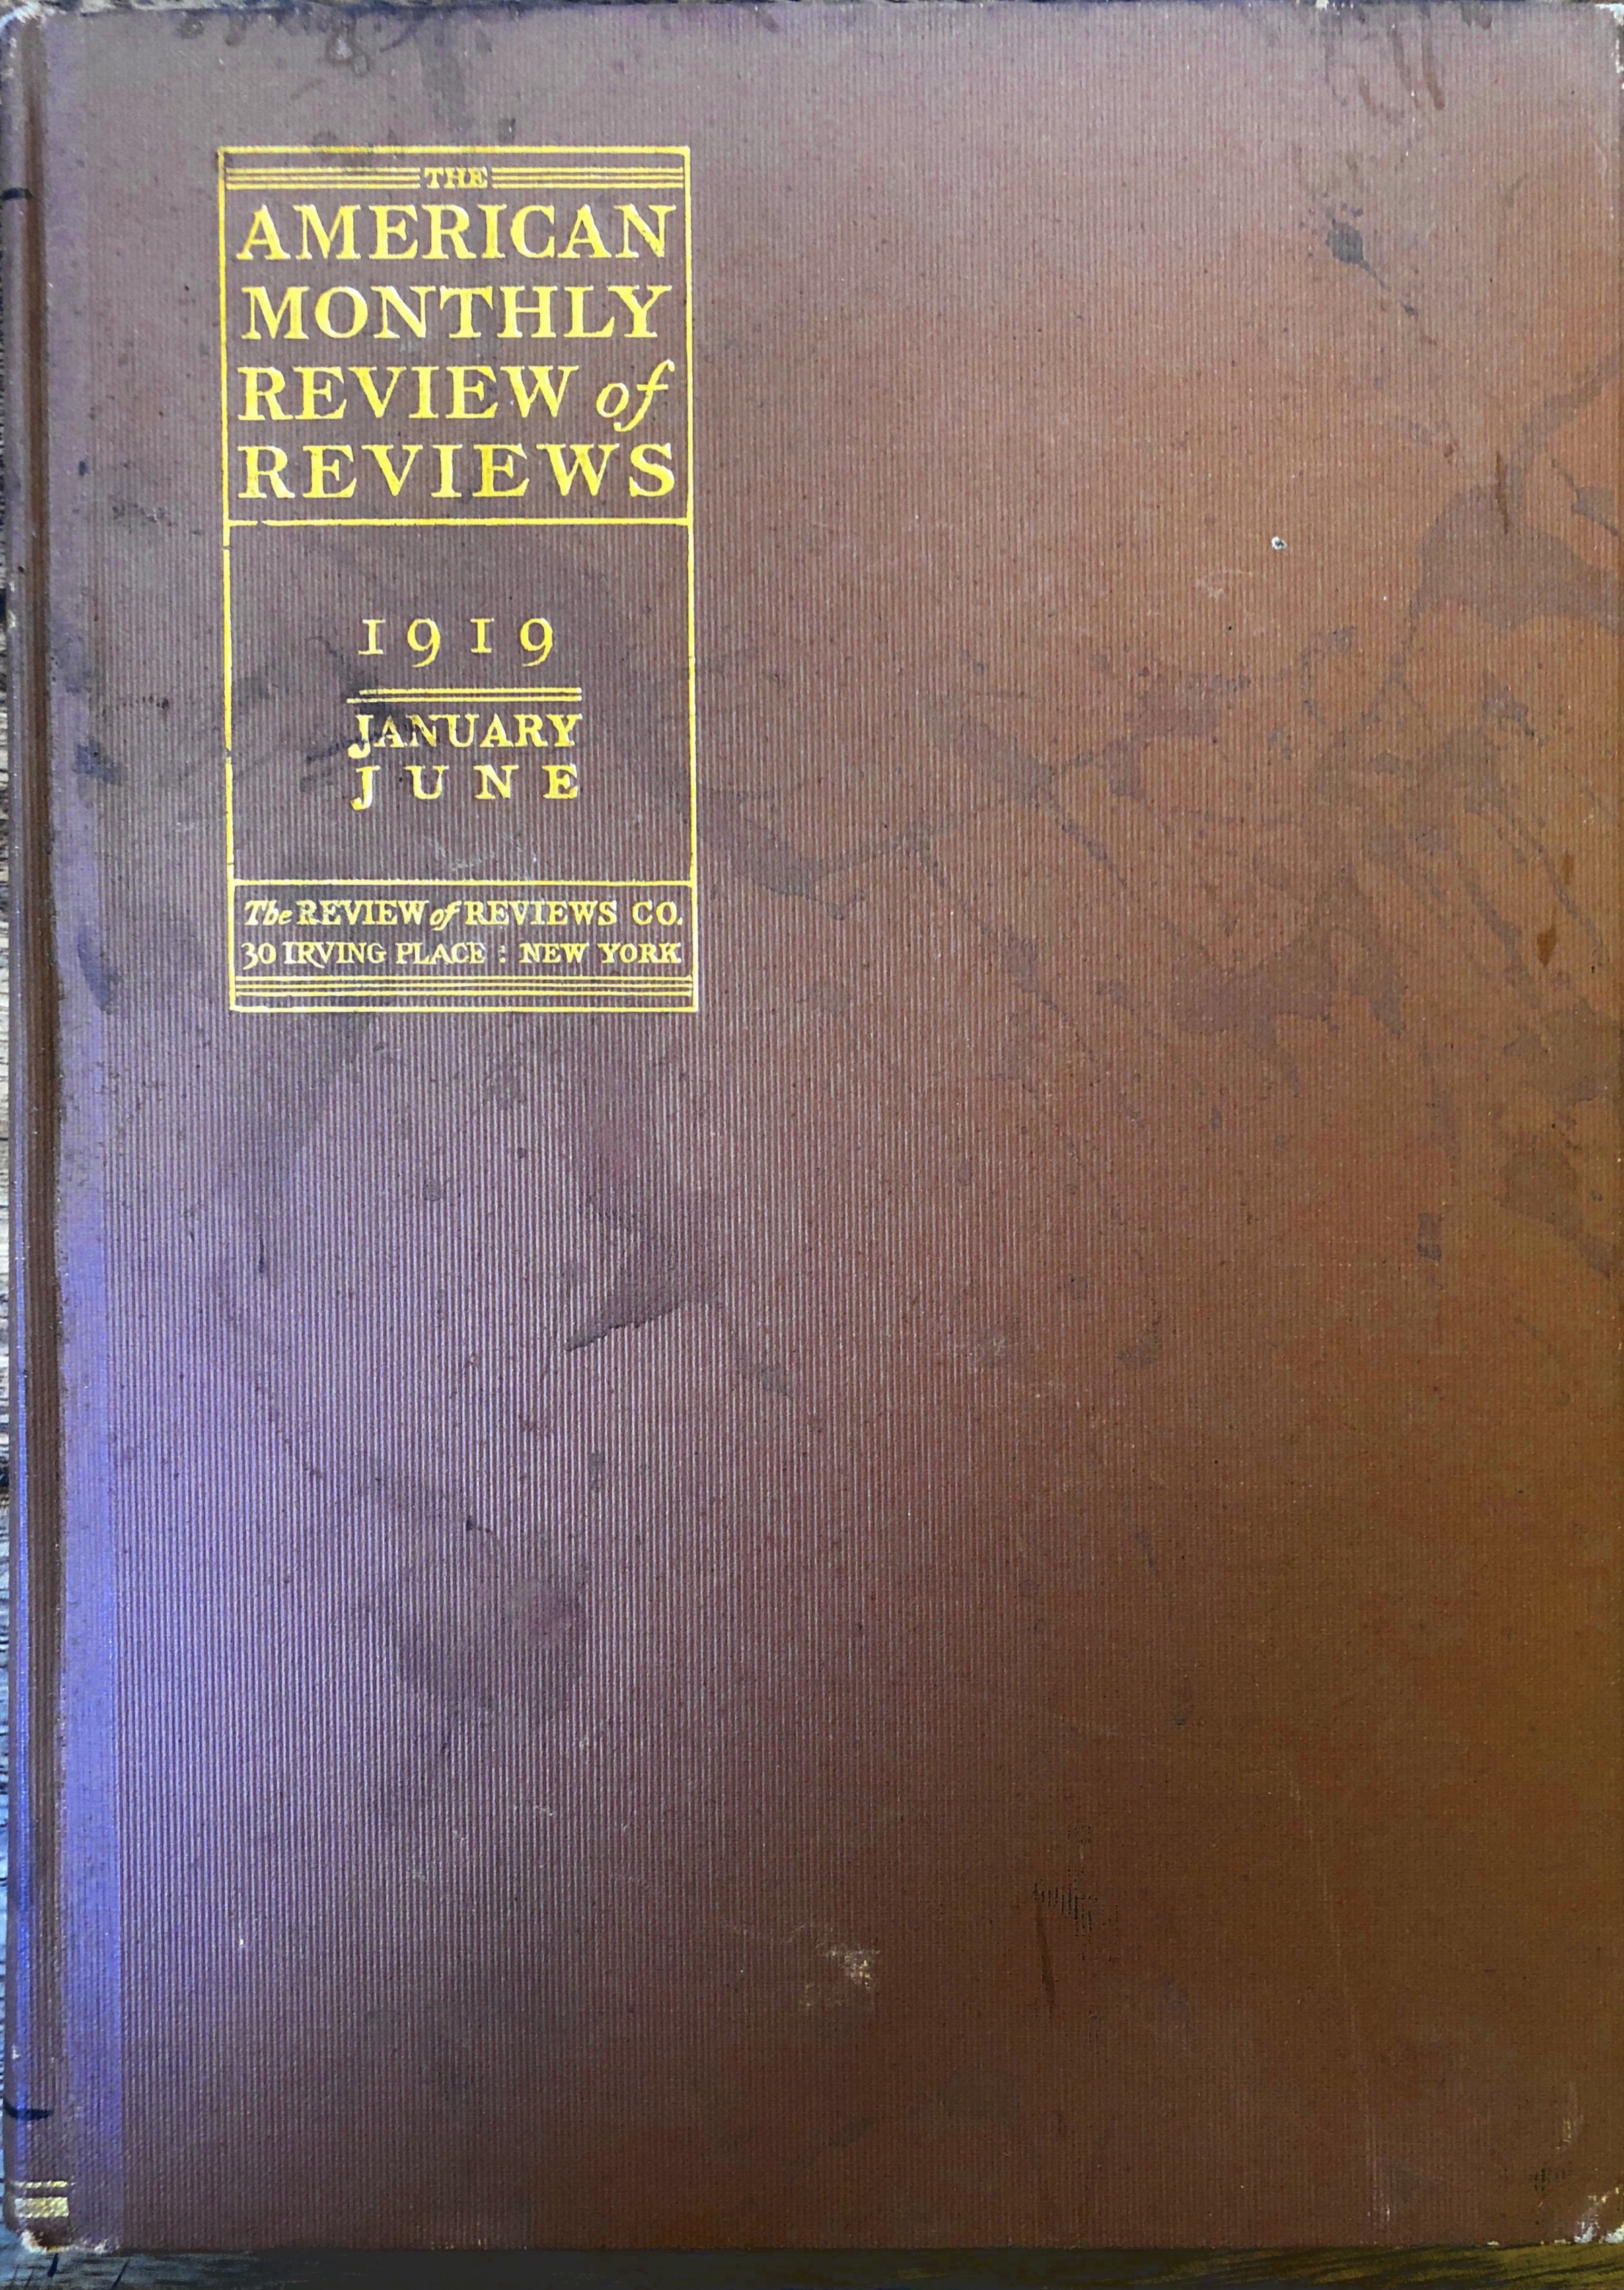 A Poet-Painter of Lebanon, The American Review of Reviews, Edited by Albert Shaw, New York: The Review of Reviews Company, vol. LIX, January-June 1919, p. 212.